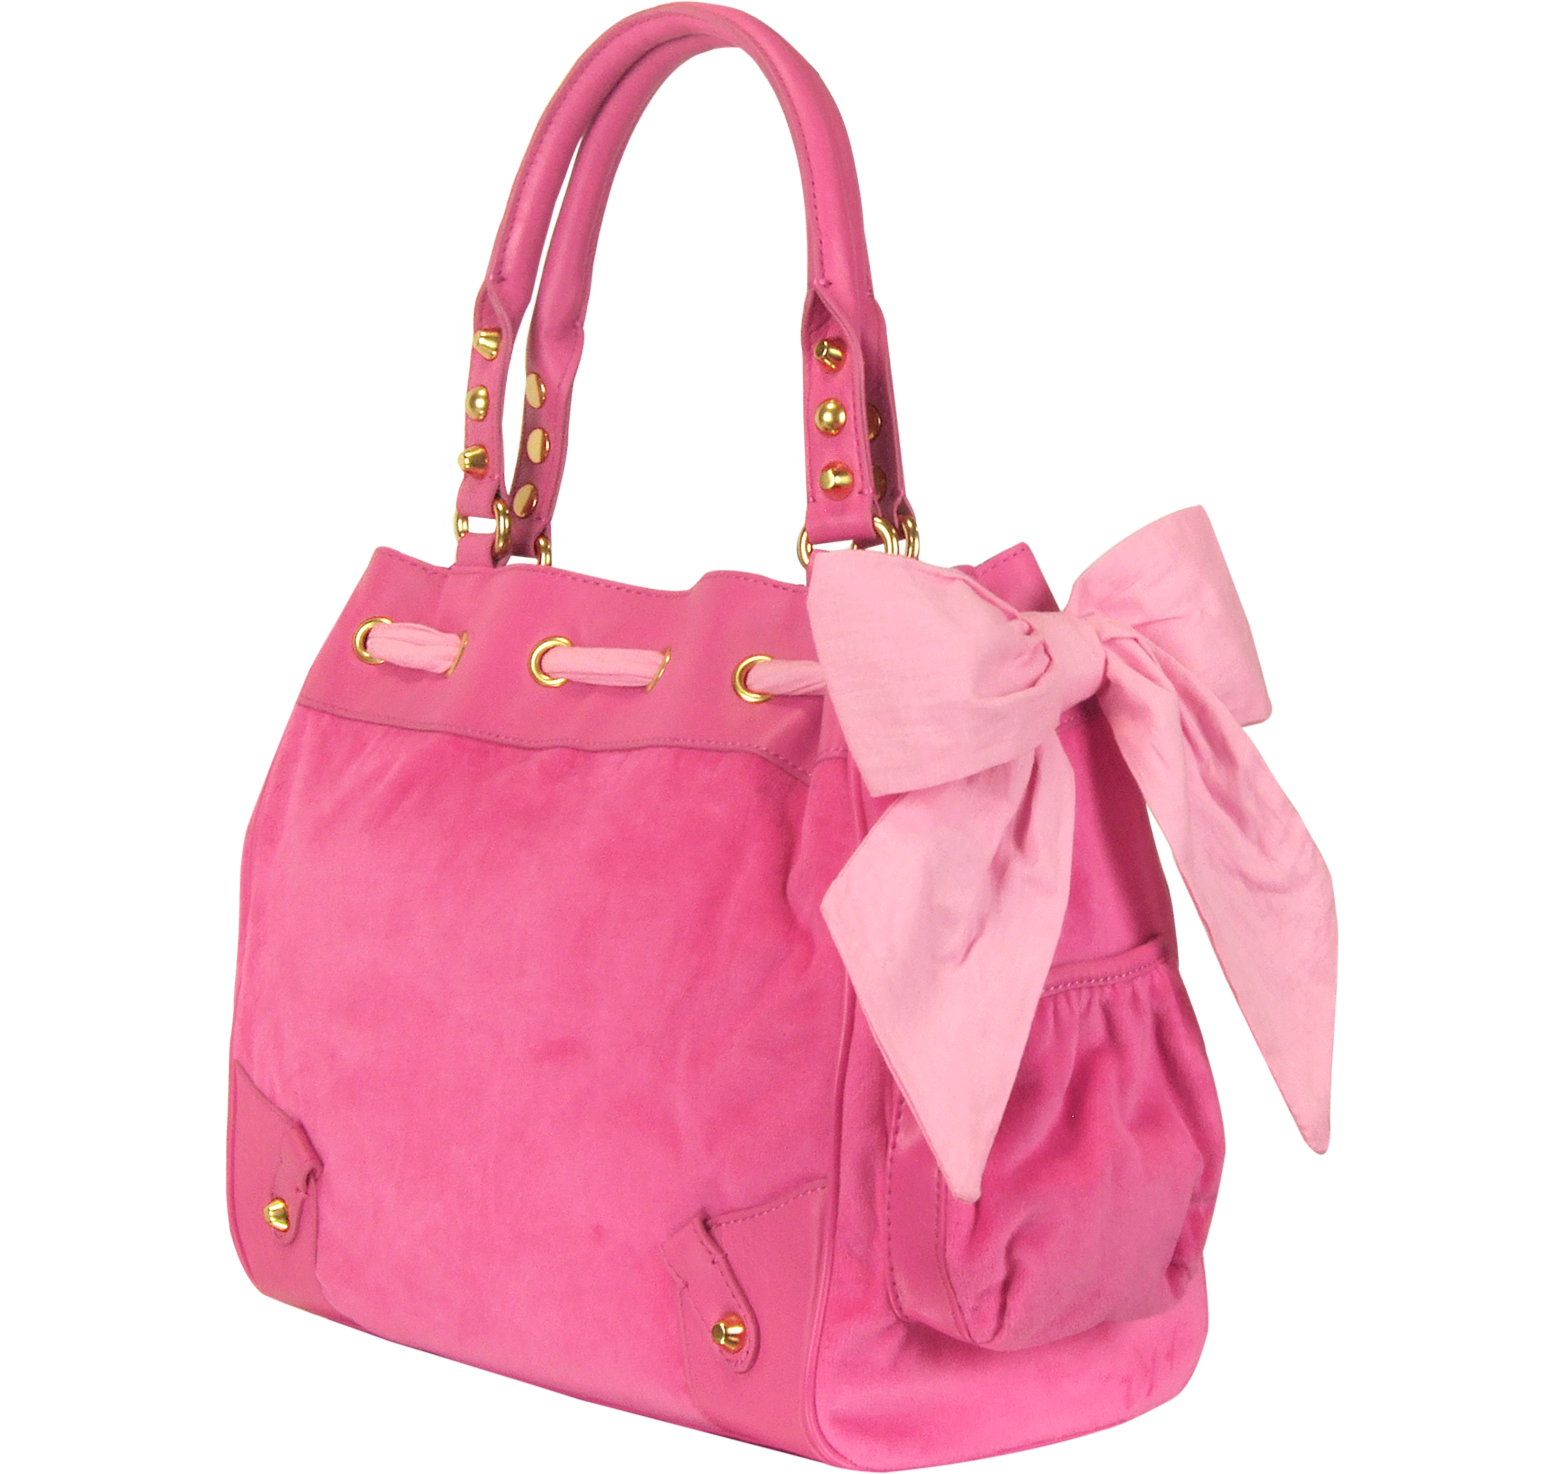 Juicy Couture New Scottie Embroidery Daydreamer Bag at FORZIERI